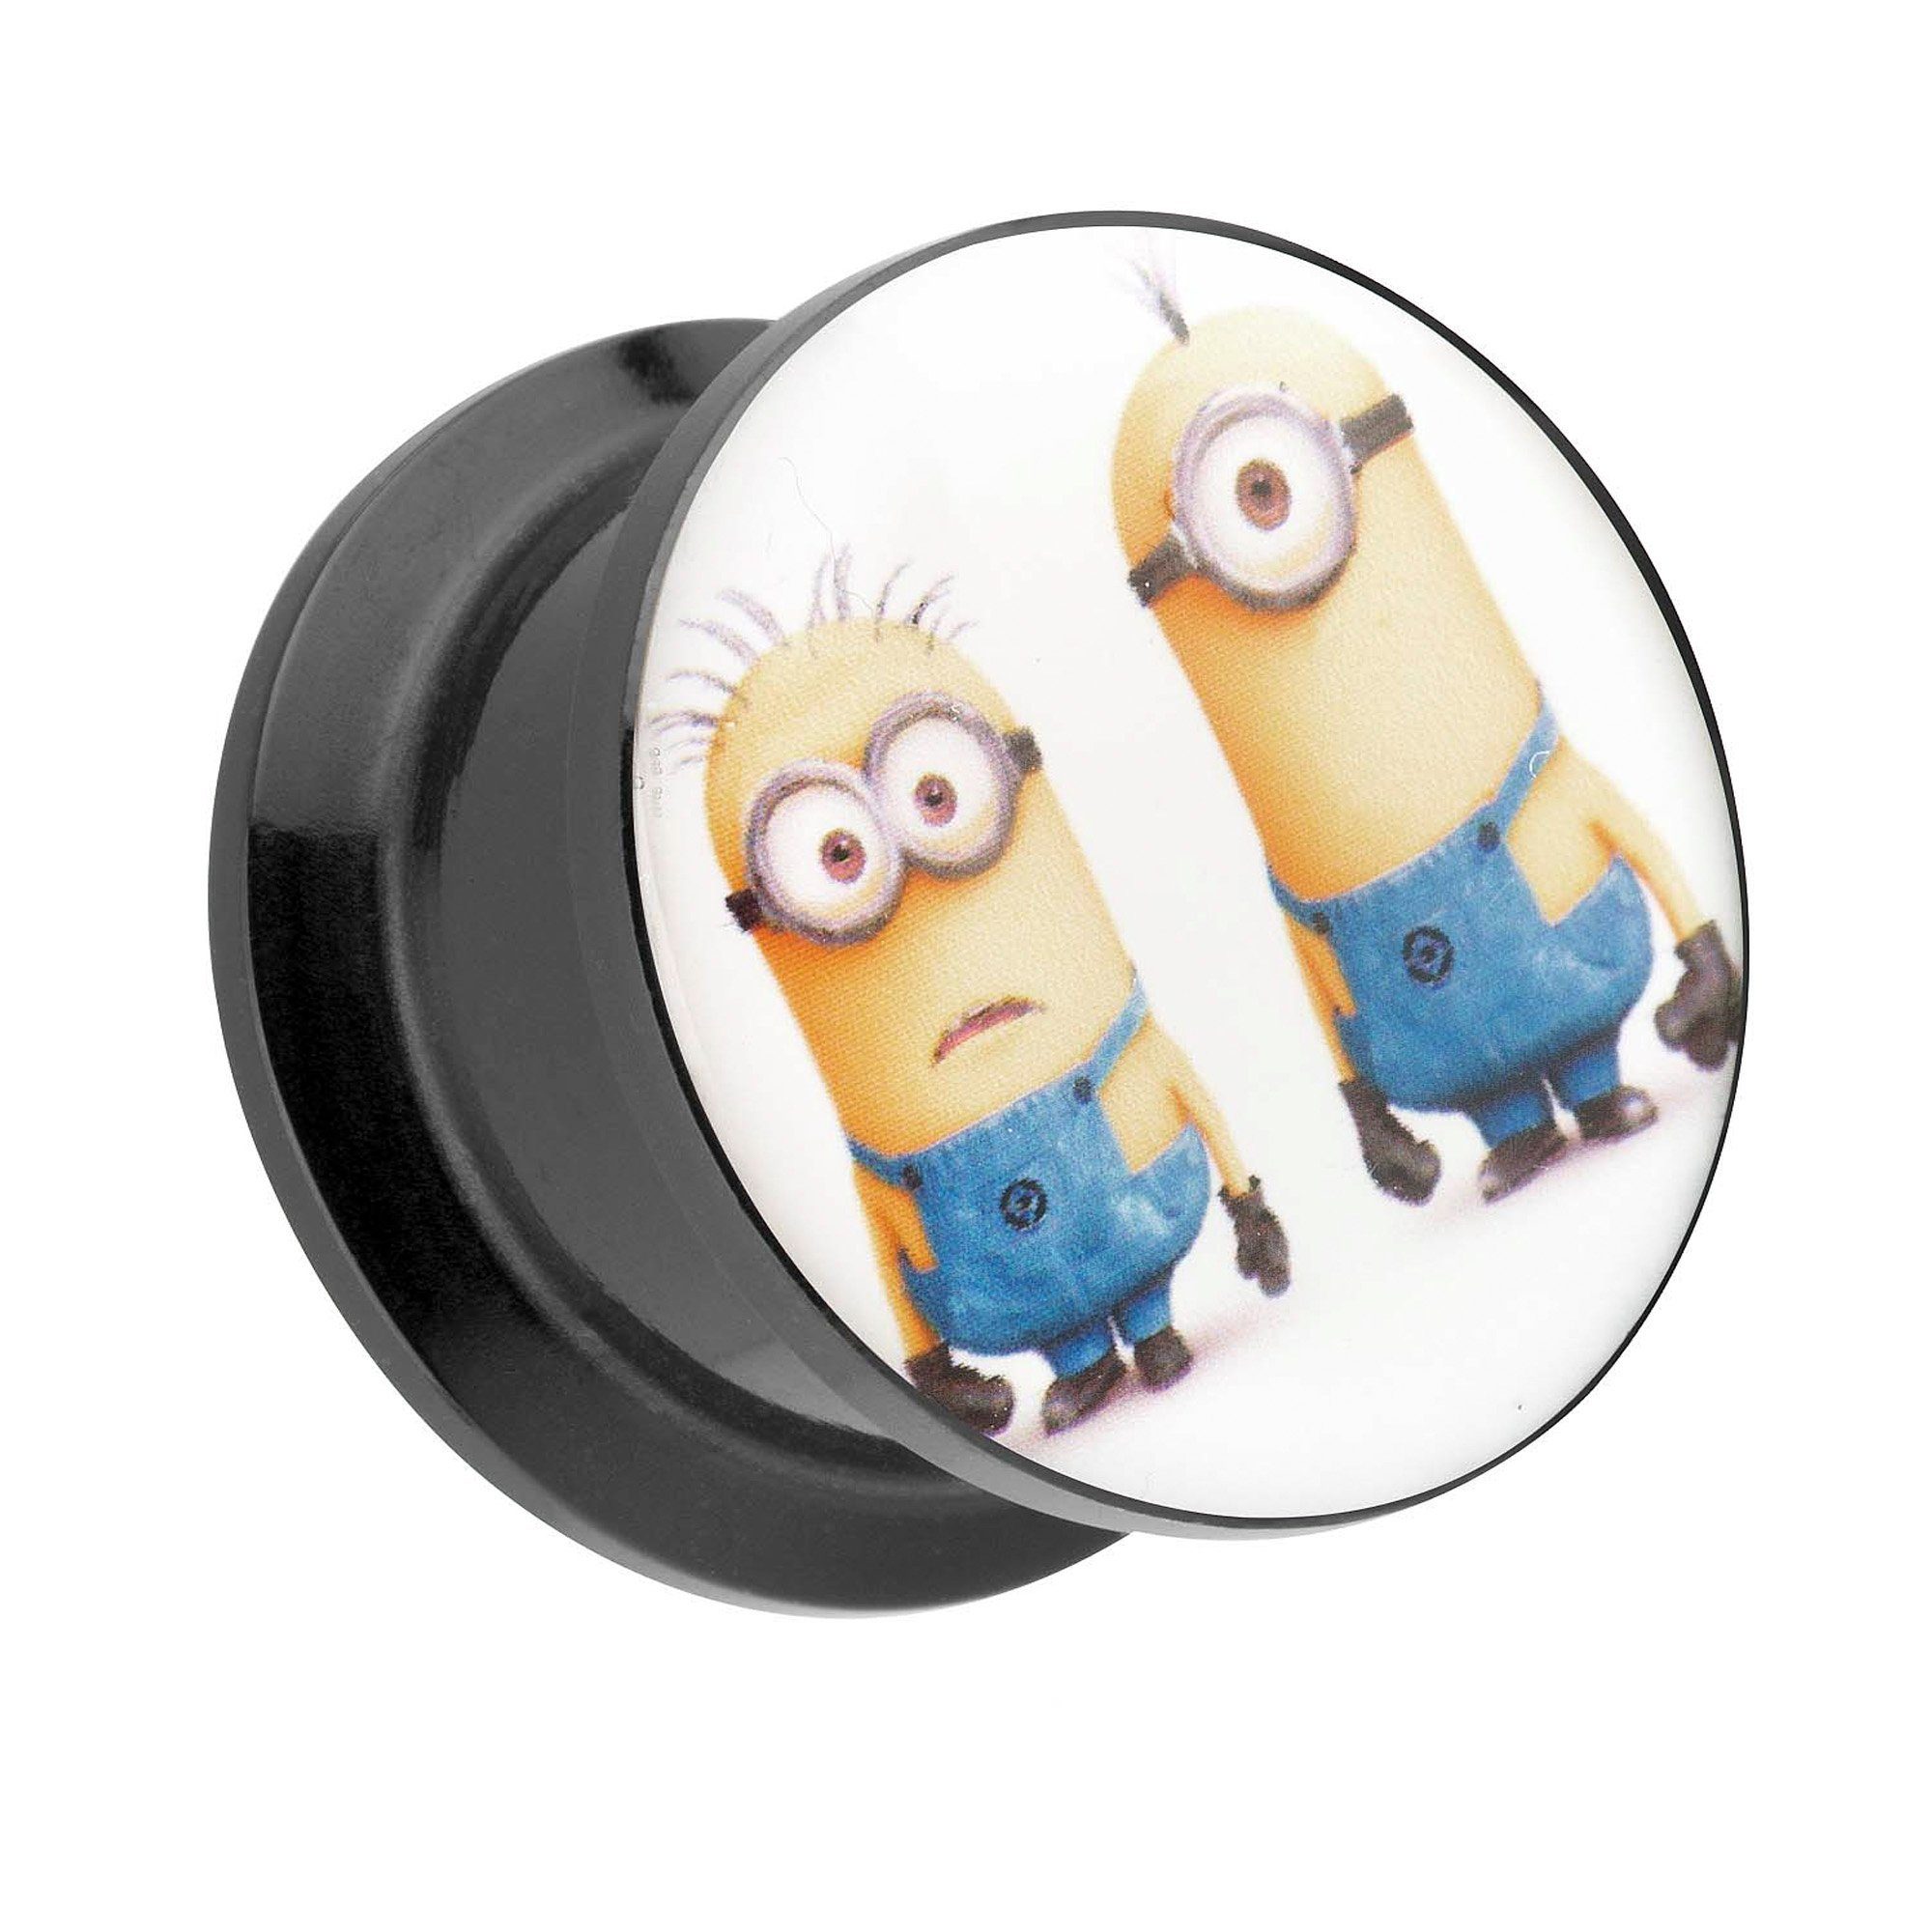 Taffstyle Ohrpiercing Minions Plug Comic Comic, Motiv Minions Ohrpiercing Plug Picture Motiv Flesh 2 Ohr Piercing 2 Tunnel Picture